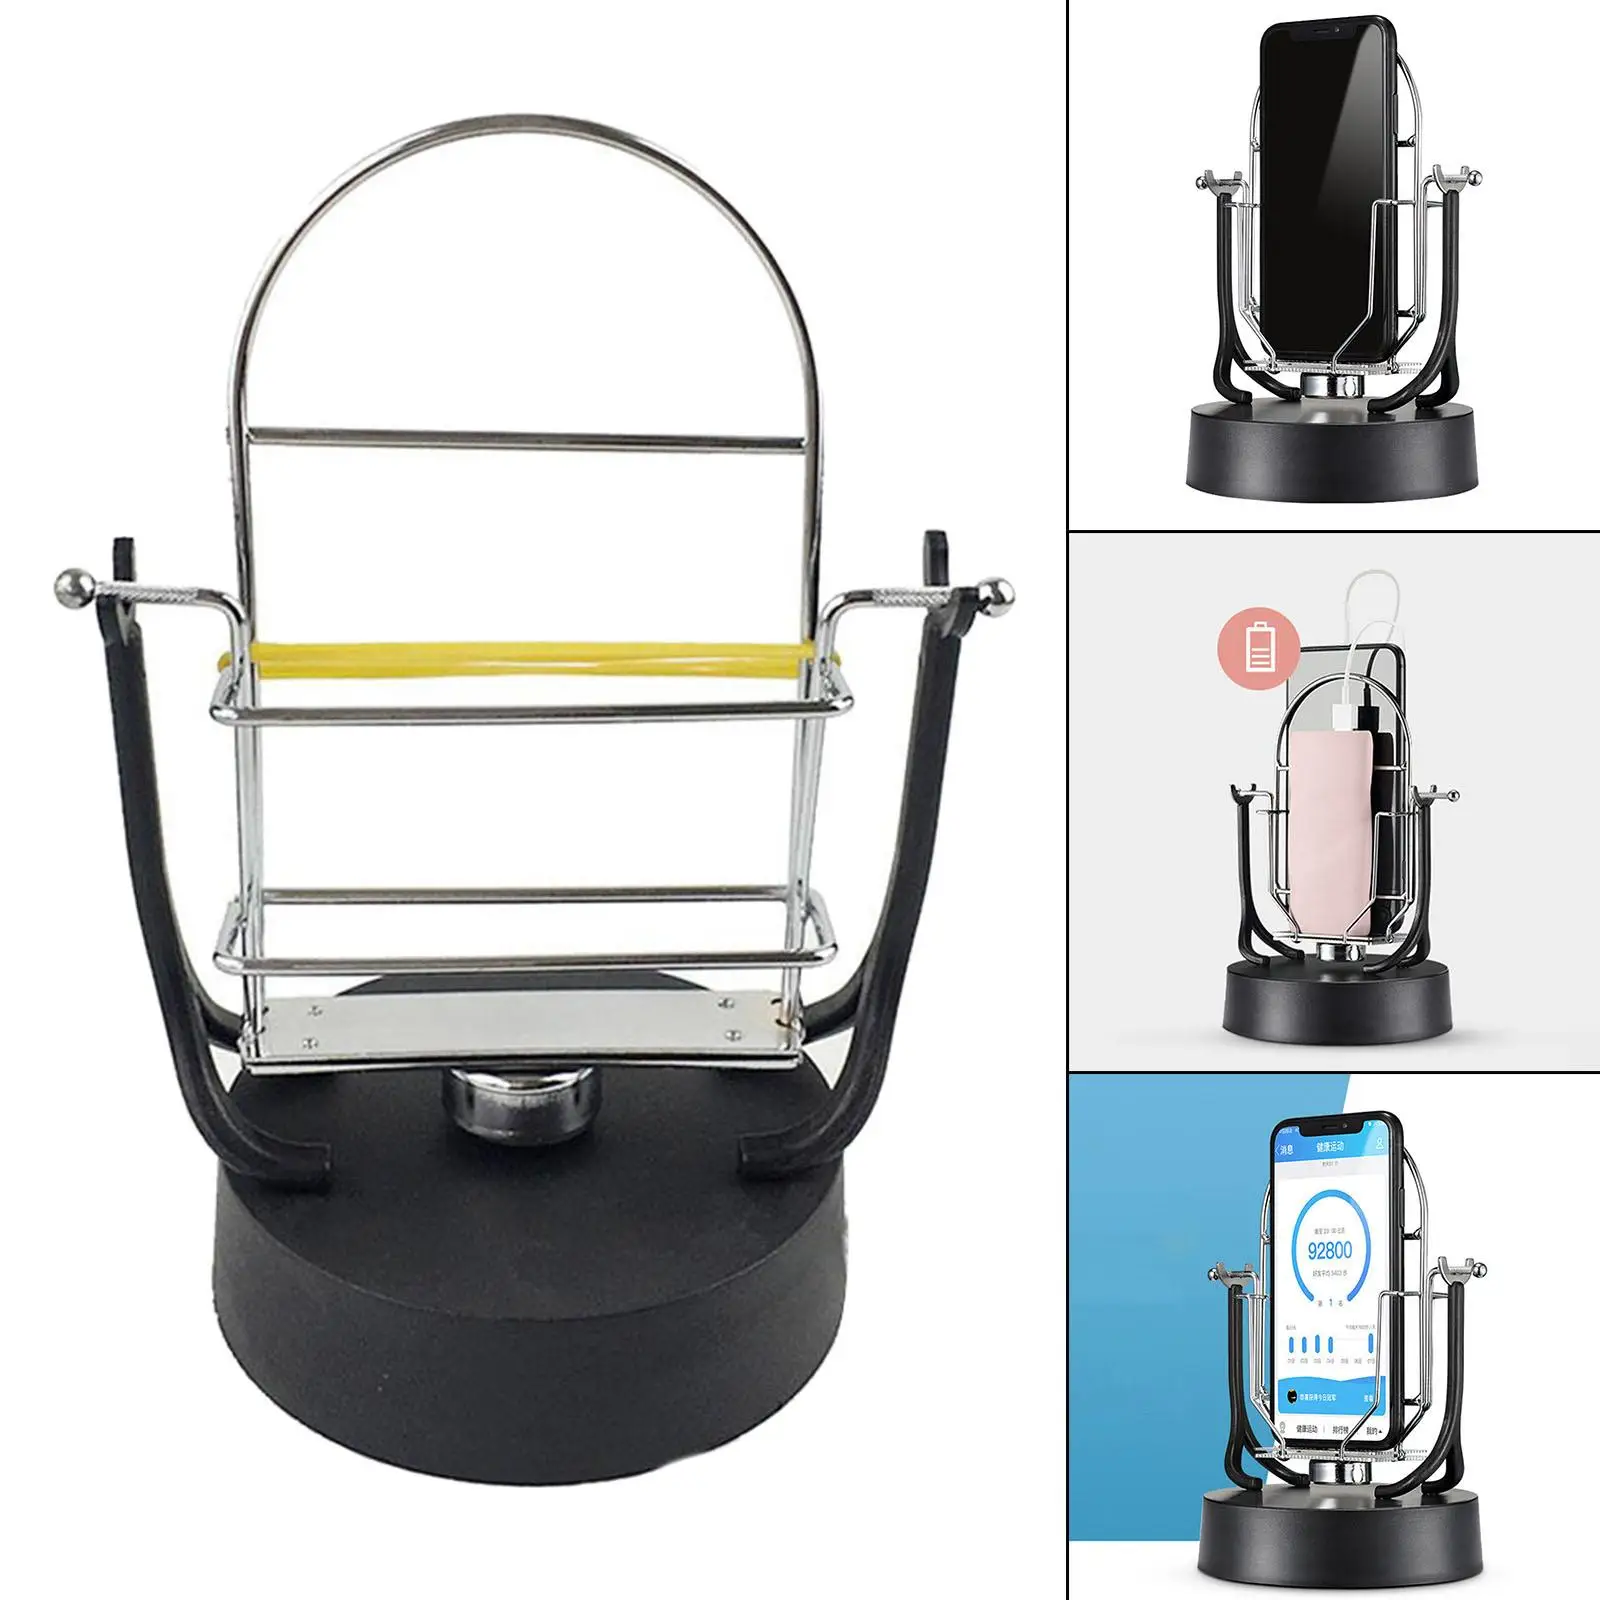 Phone Swing Device Phone Swing Two Phone Shaker    for Steps Phone Holder Shake for Double Mobile Phone